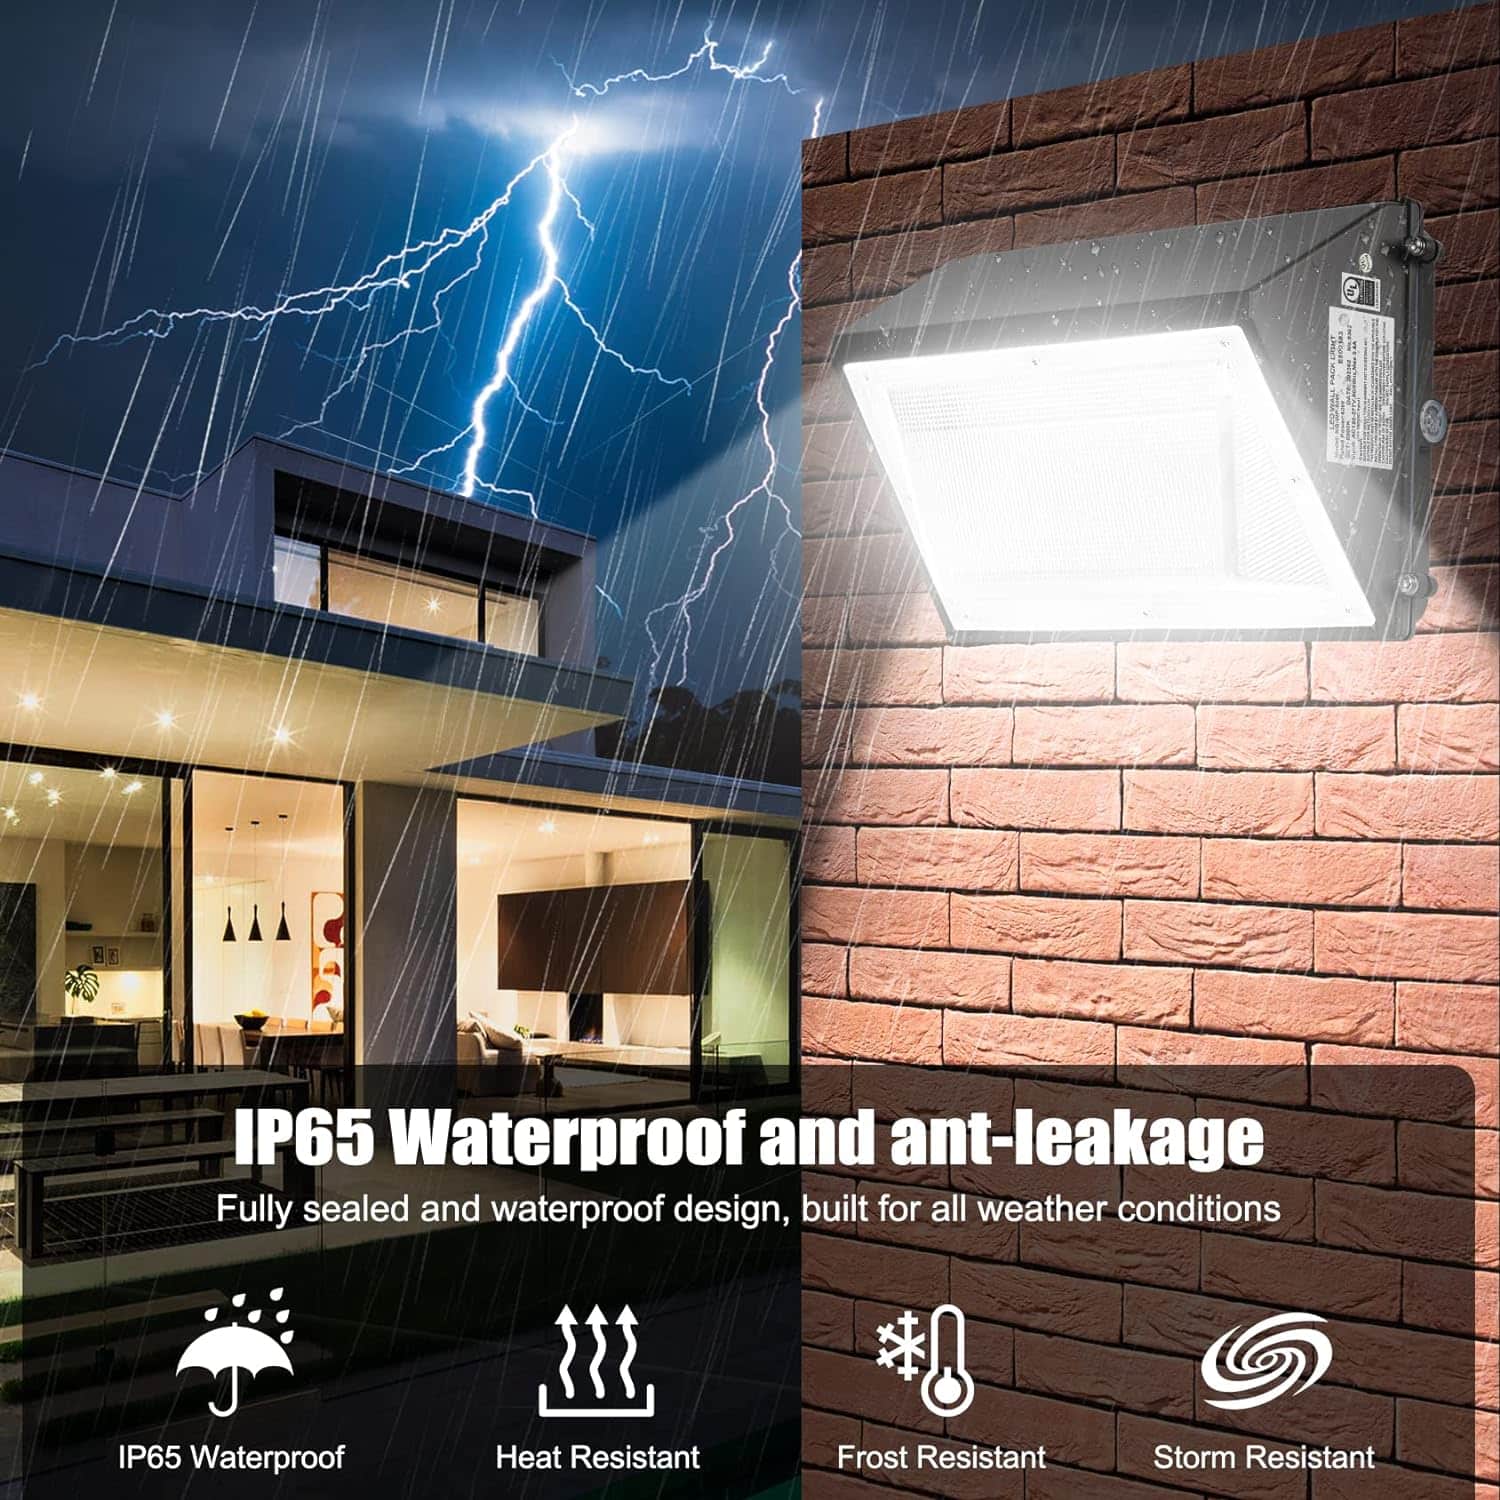 120W LED Wall Pack Light with Dusk-to-Dawn Photocell, 15600LM 5000K Daylight Commerical Security Lighting, IP65 Waterproof Wall Mount Outdoor Flood Light for Warehouse Factory Yard, UL ETL DLC Listed